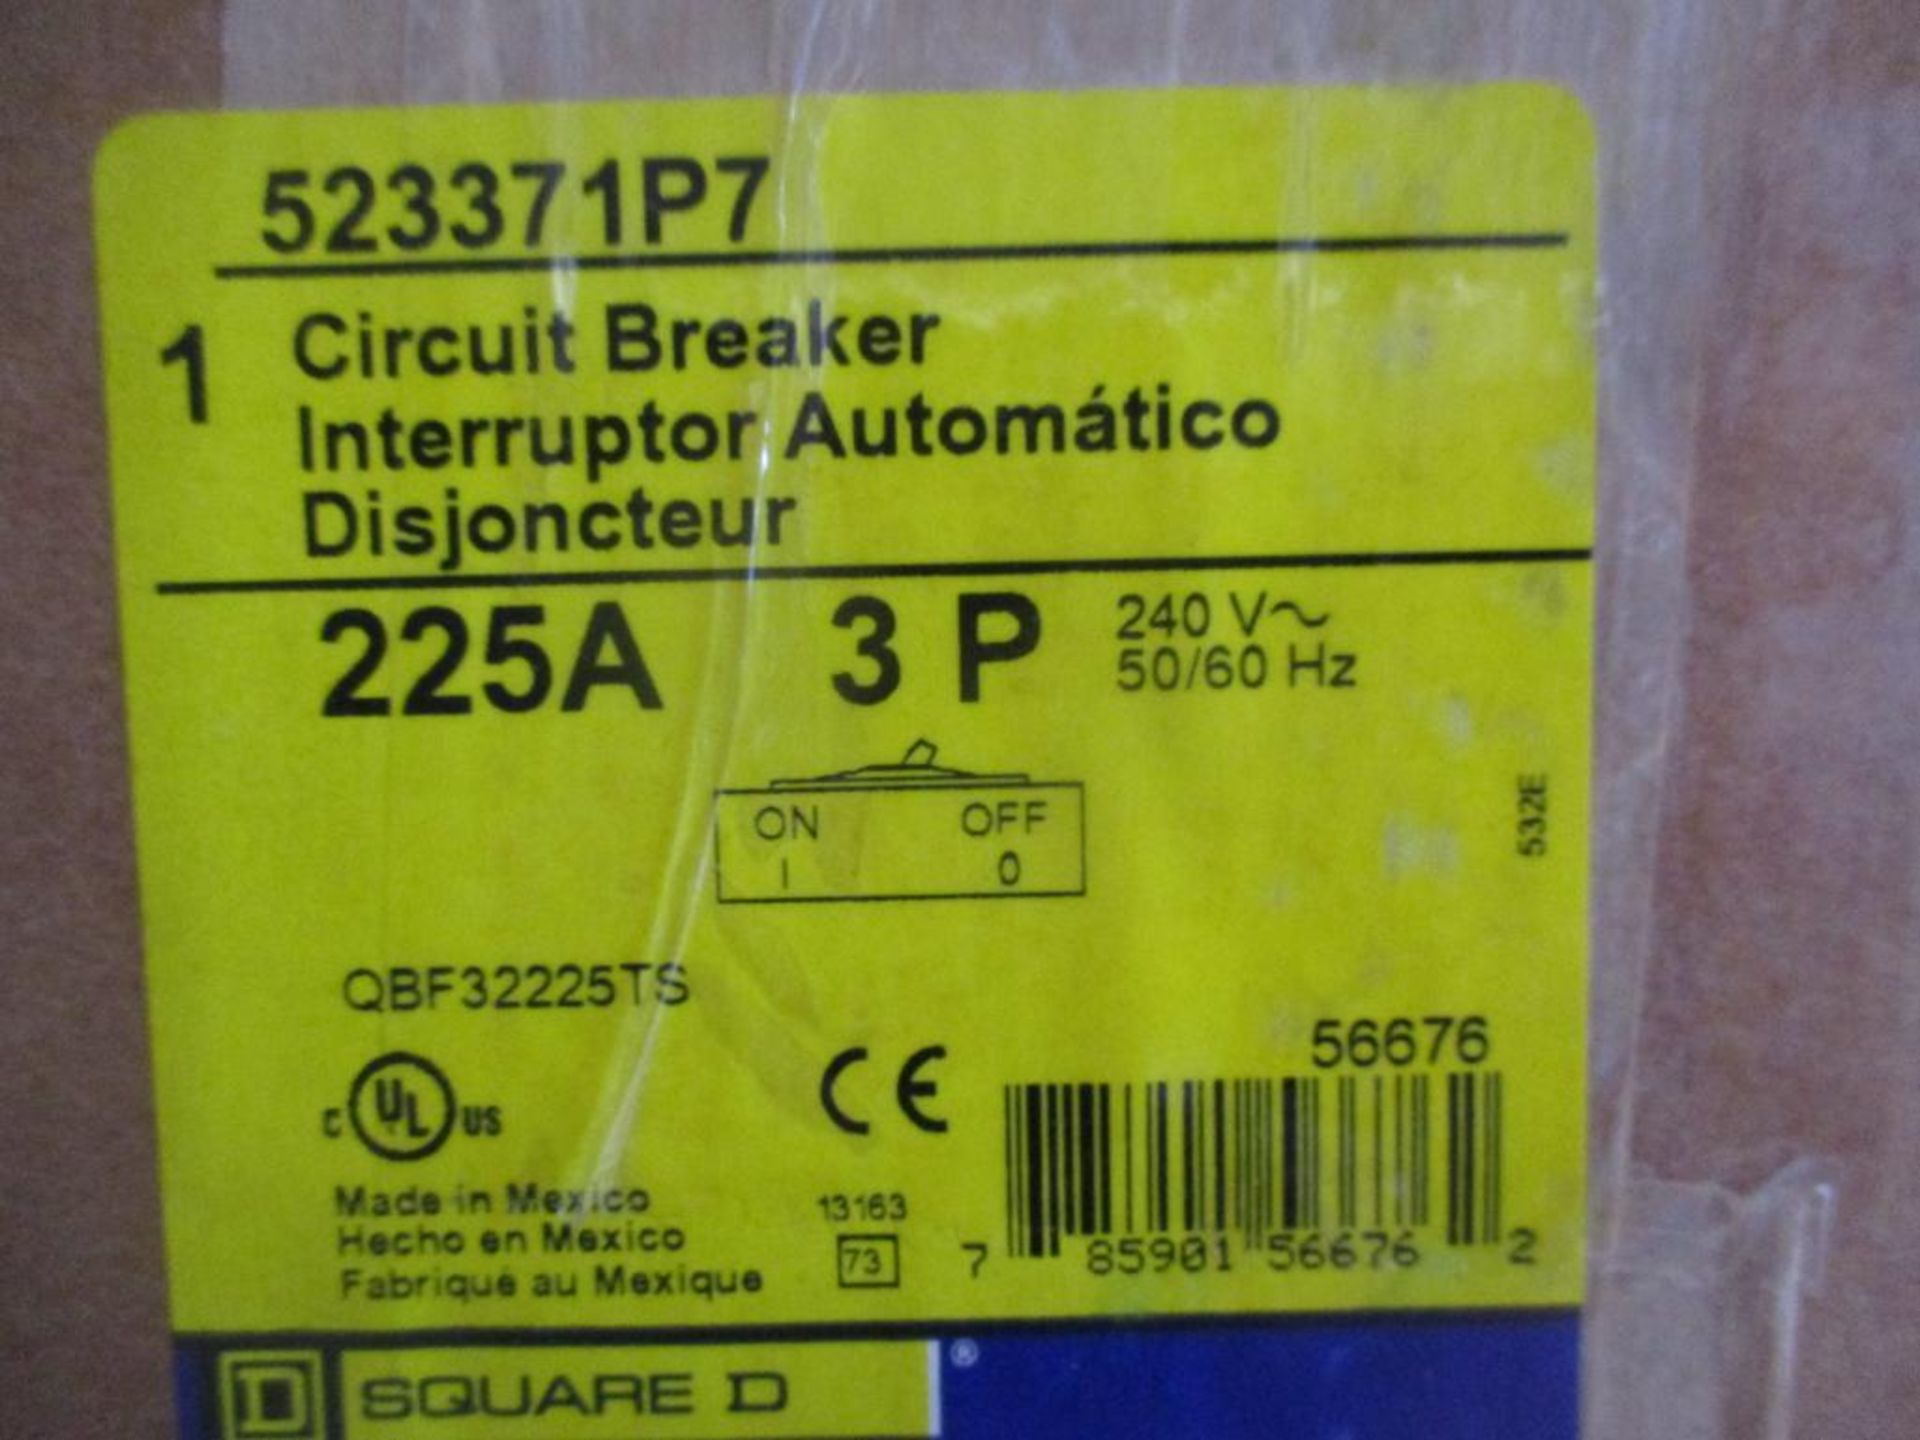 Square D 225 AMP Circuit Breaker, 523371P7, 225A, 3P, 240VAC, PowerPacT QB225 (New in Box) - Image 4 of 4